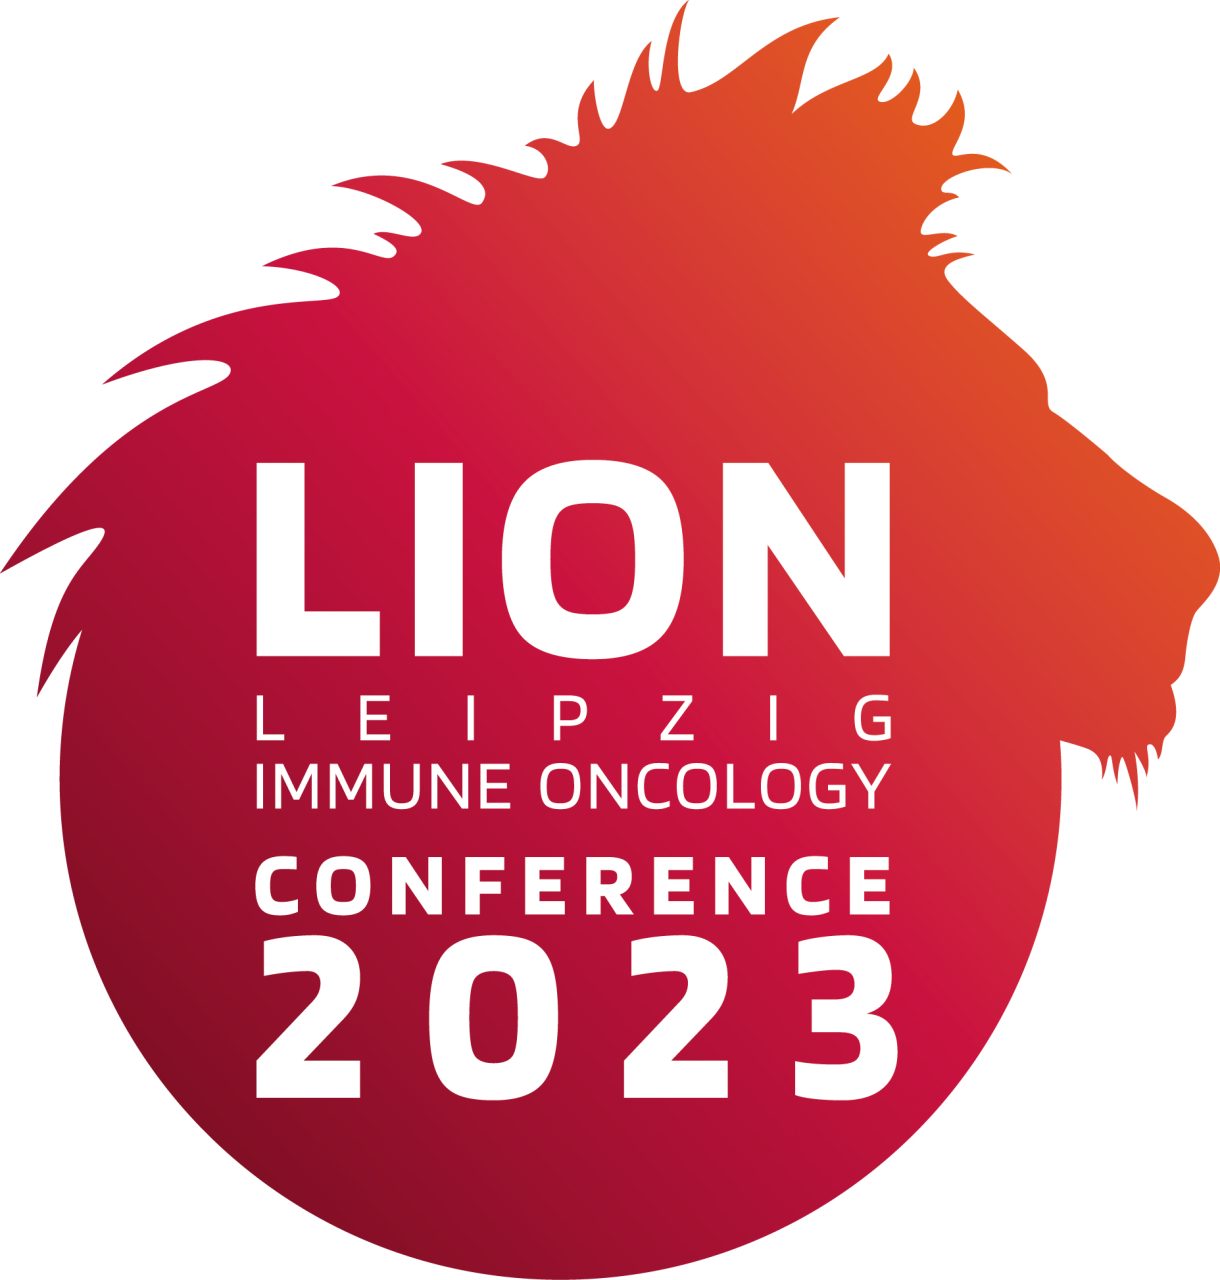 Ulrike Köhl: In less than a week our Leipzig Immunoncology (LION) Conference will start